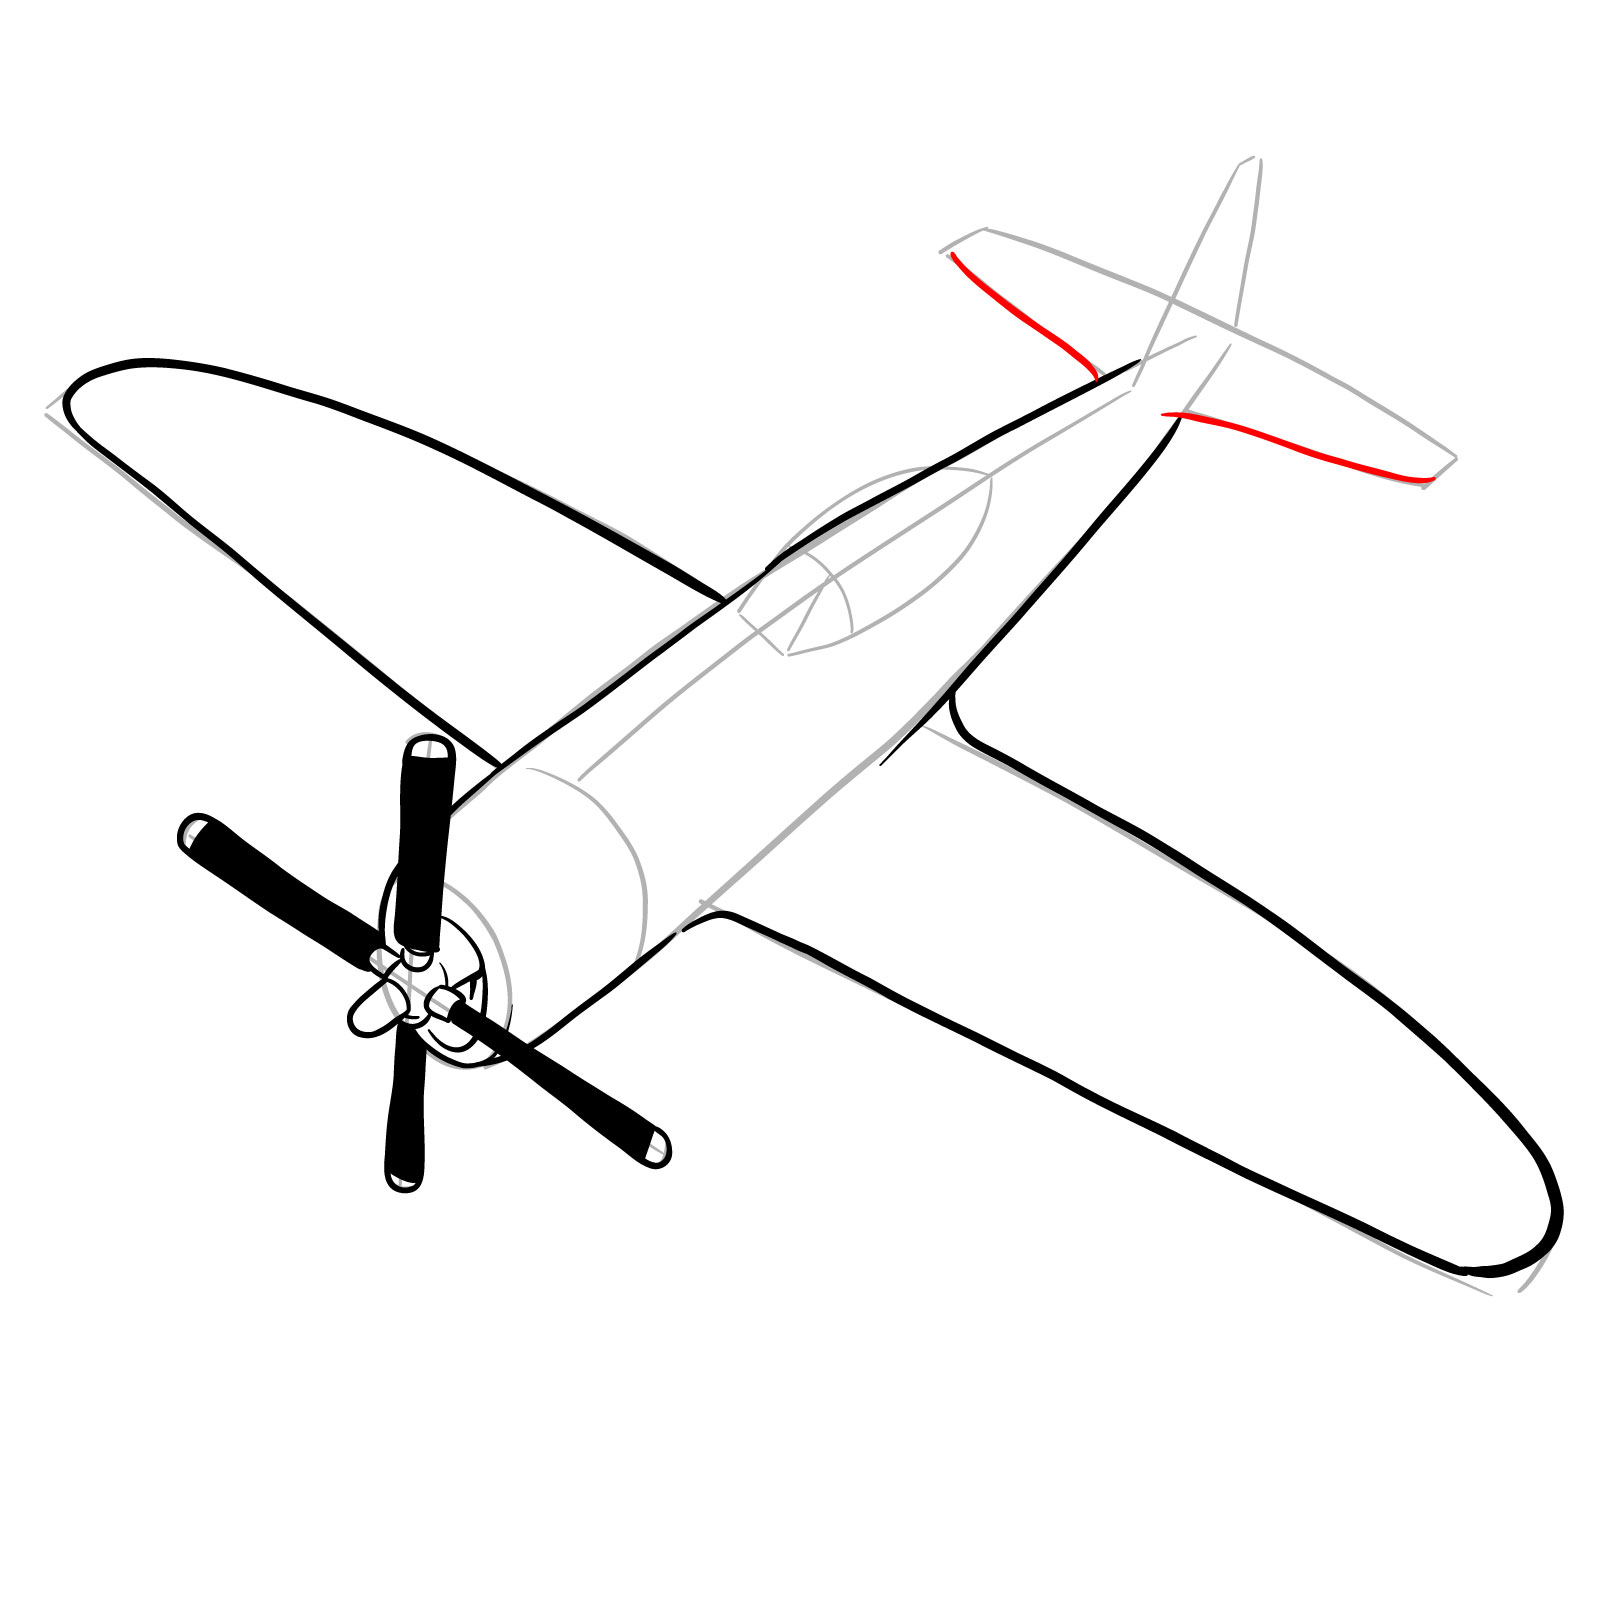 How to draw the Republic P-47 Thunderbolt - step 15